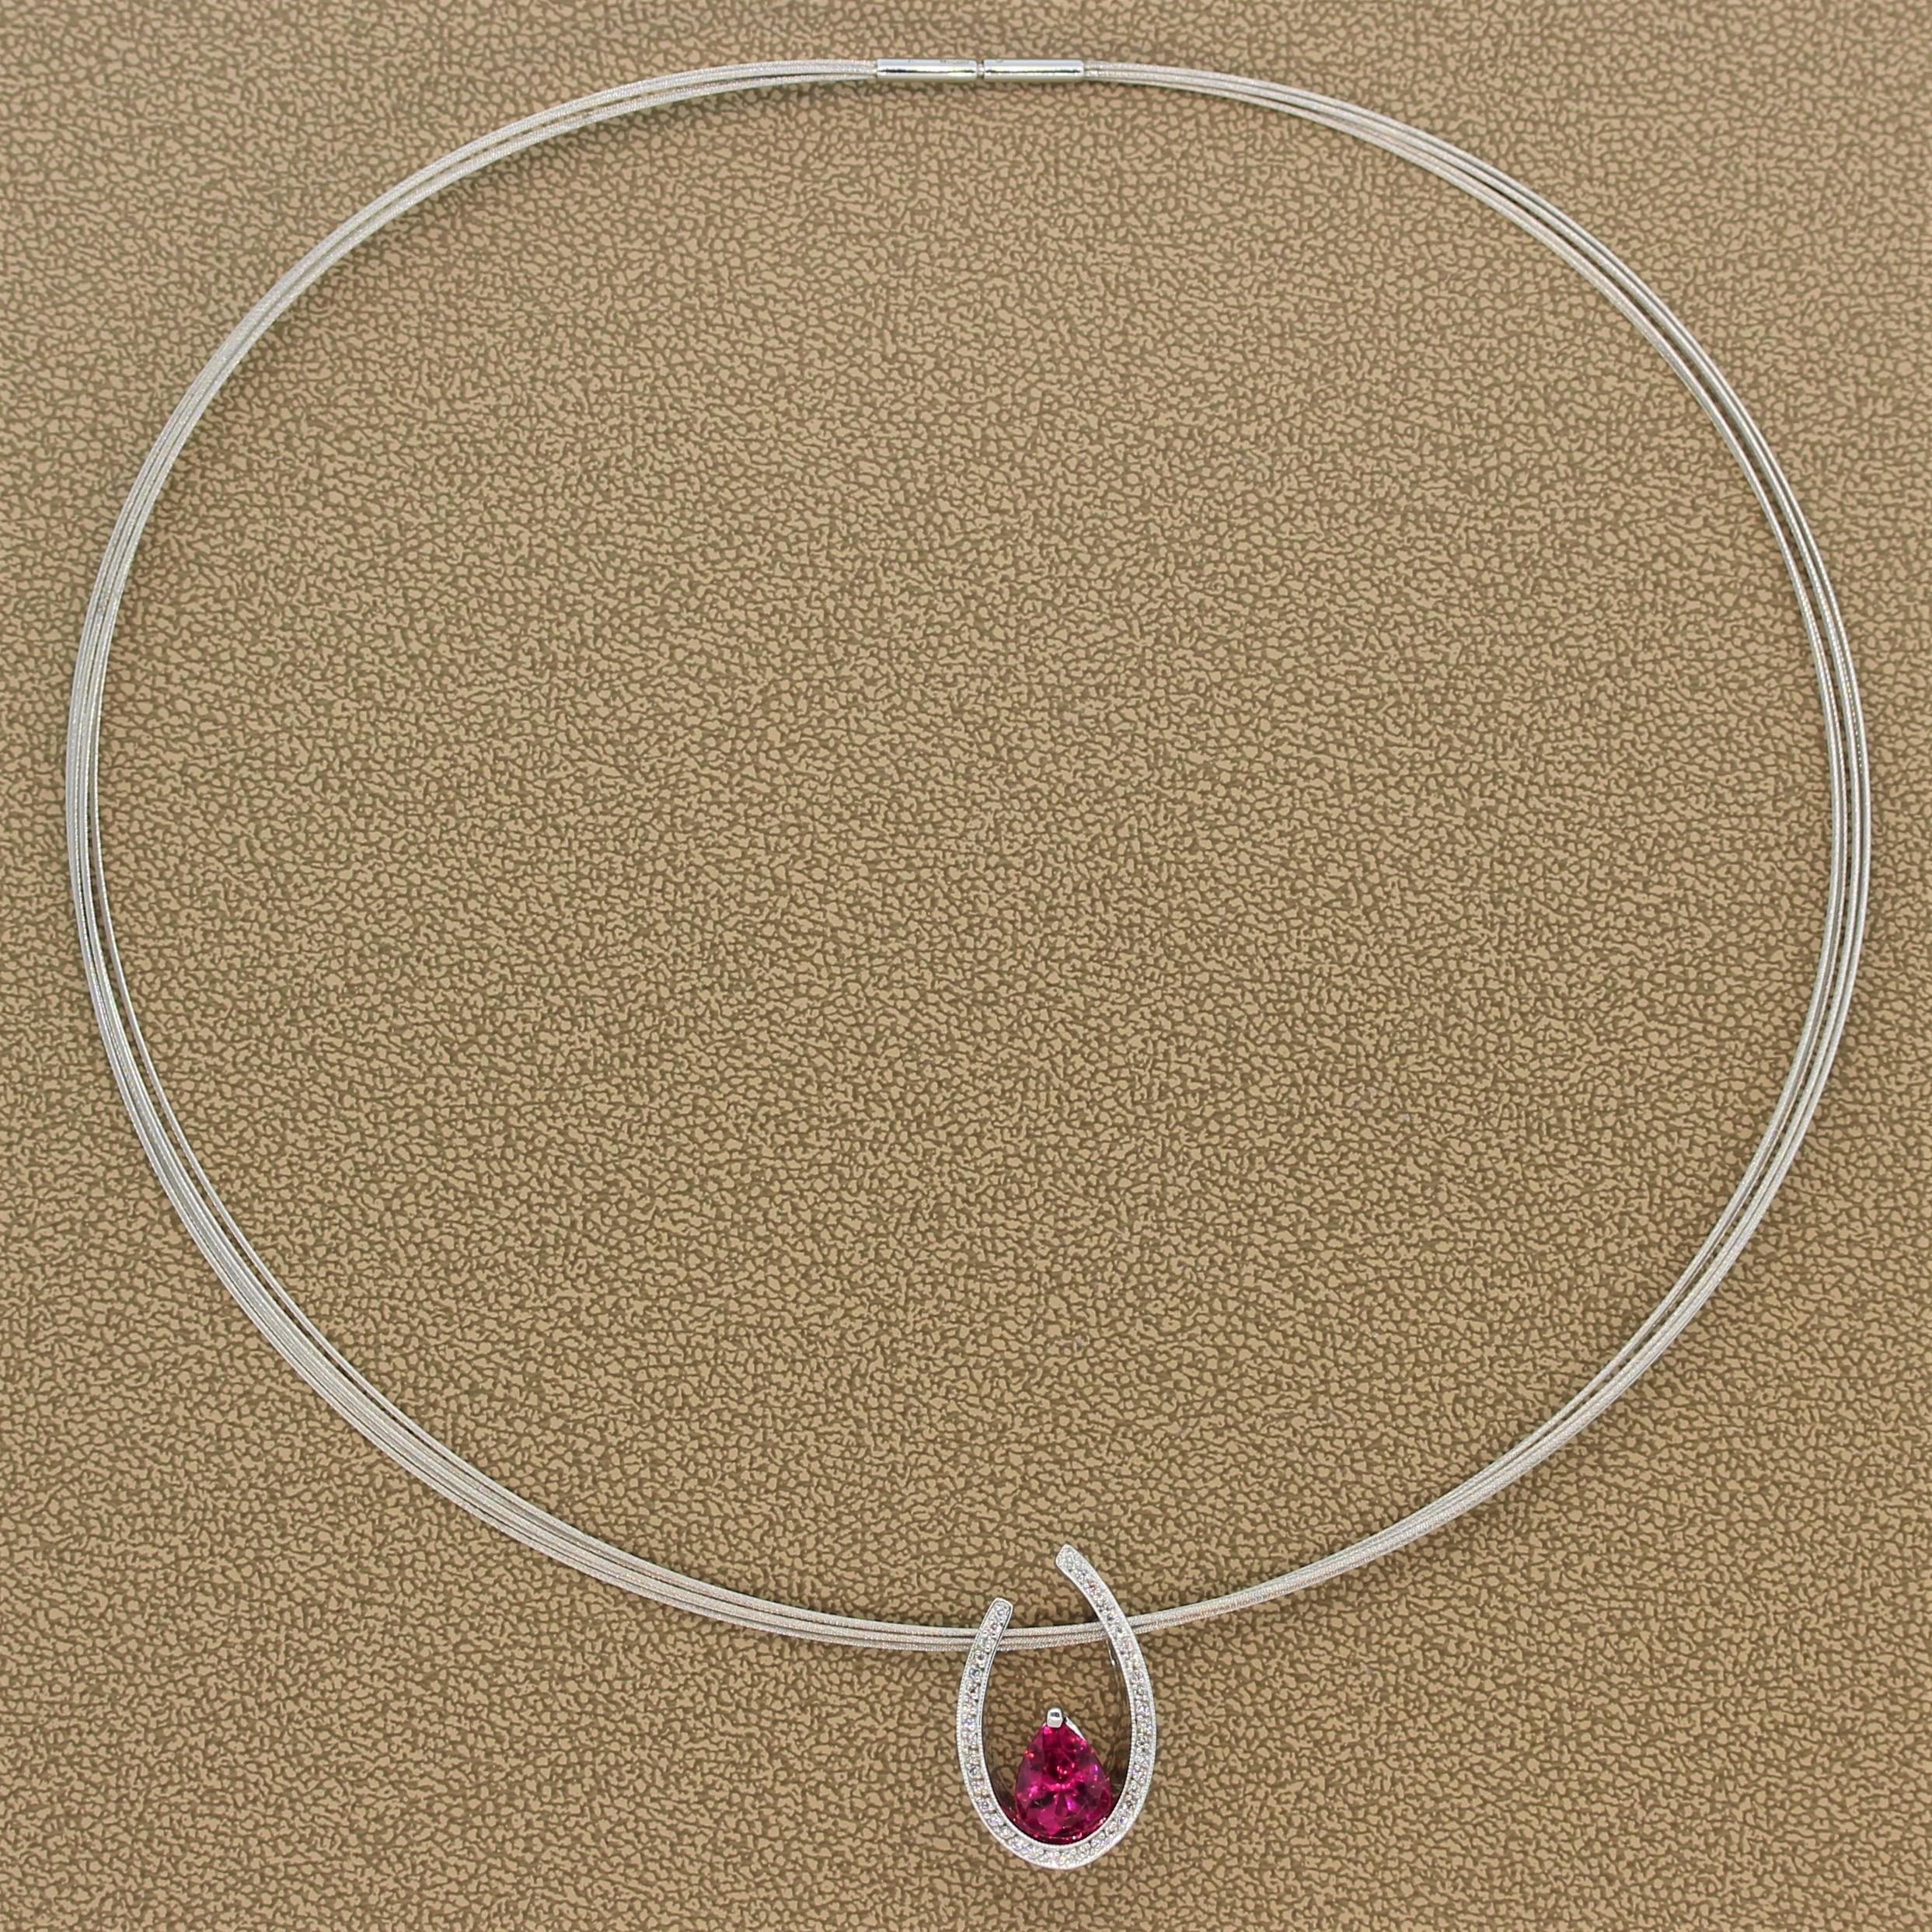 A beautiful pendant featuring a 2.12 carat vivid pink tourmaline. The feminine gemstone sits gracefully at the bottom of a horseshoe shaped 14K white gold slide setting studded by 0.21 carats of round cut diamonds with a milgrain design along the